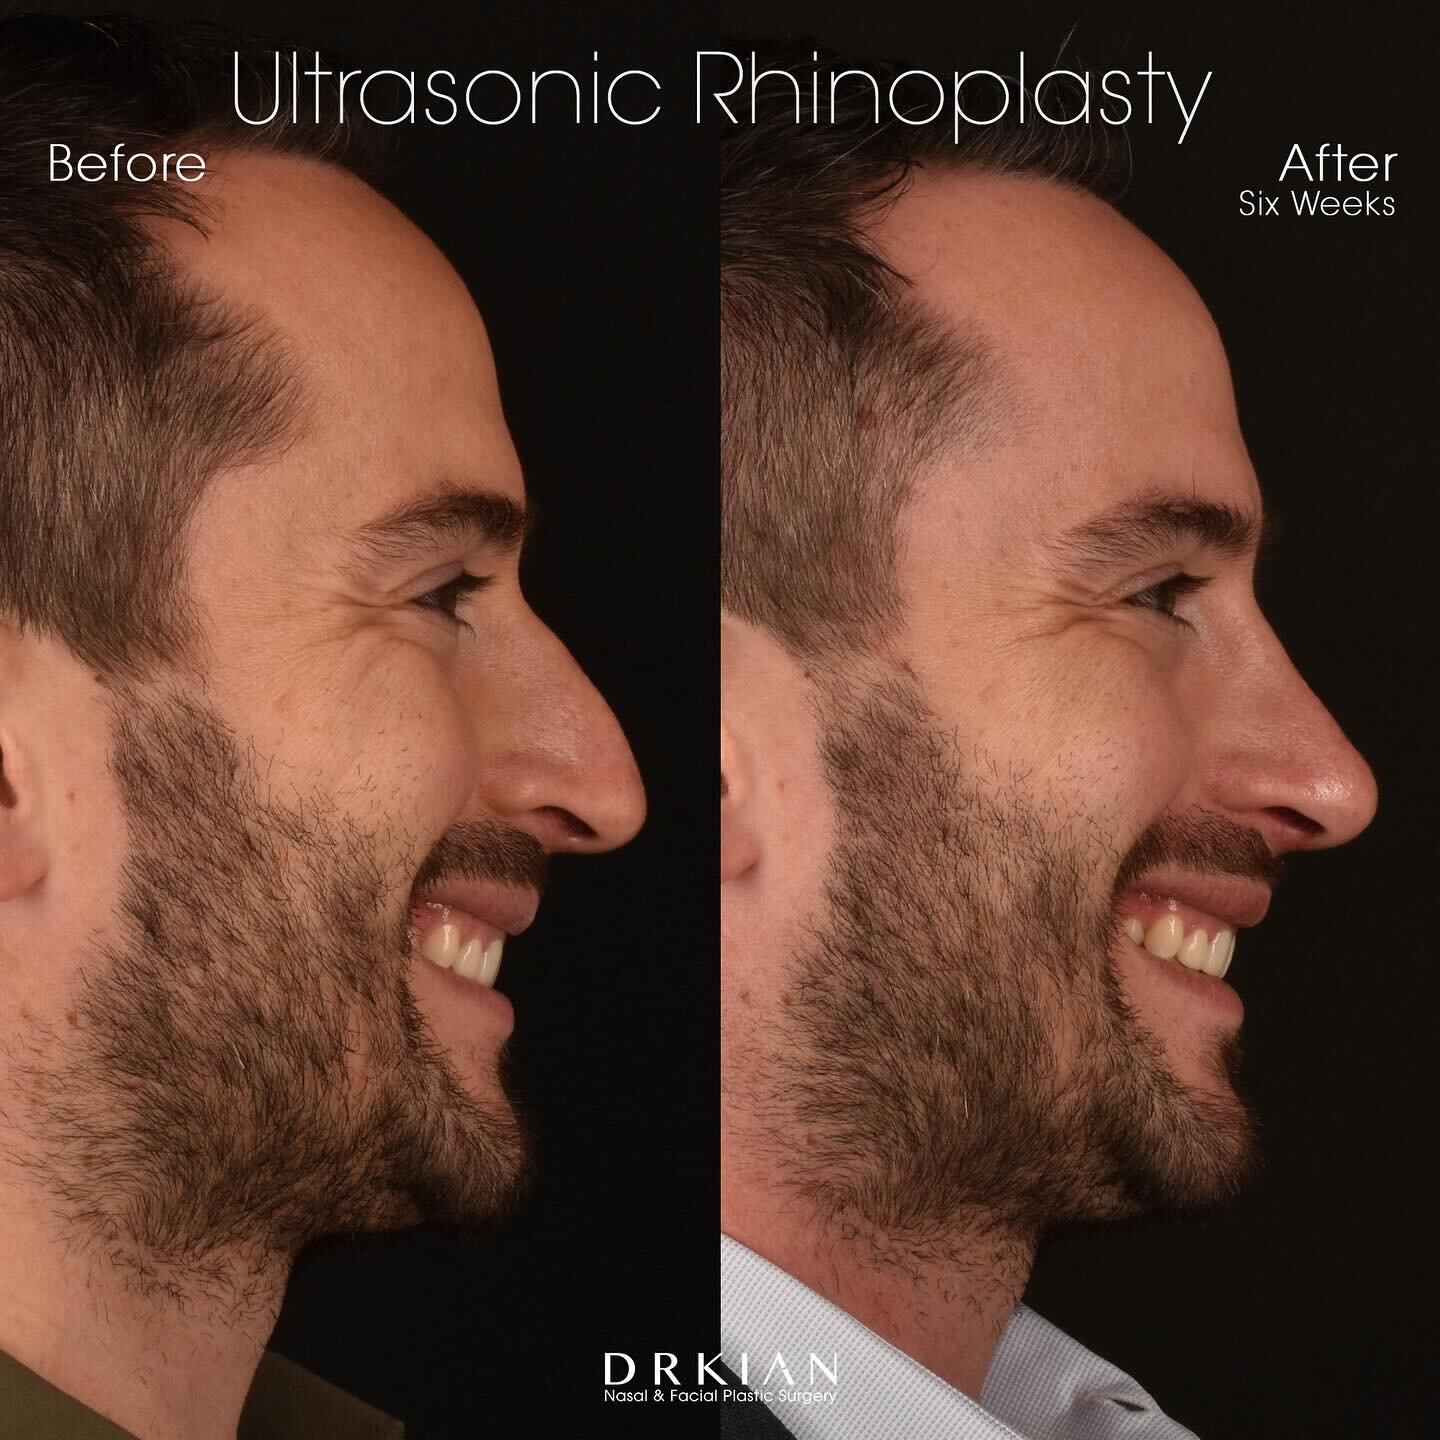 During consultation my handsome patient shared that his primary concern was how his tip dips downward when smiling which he wanted to improve without altering his appearance. He had thought about undergoing cosmetic rhinoplasty procedure for years, d